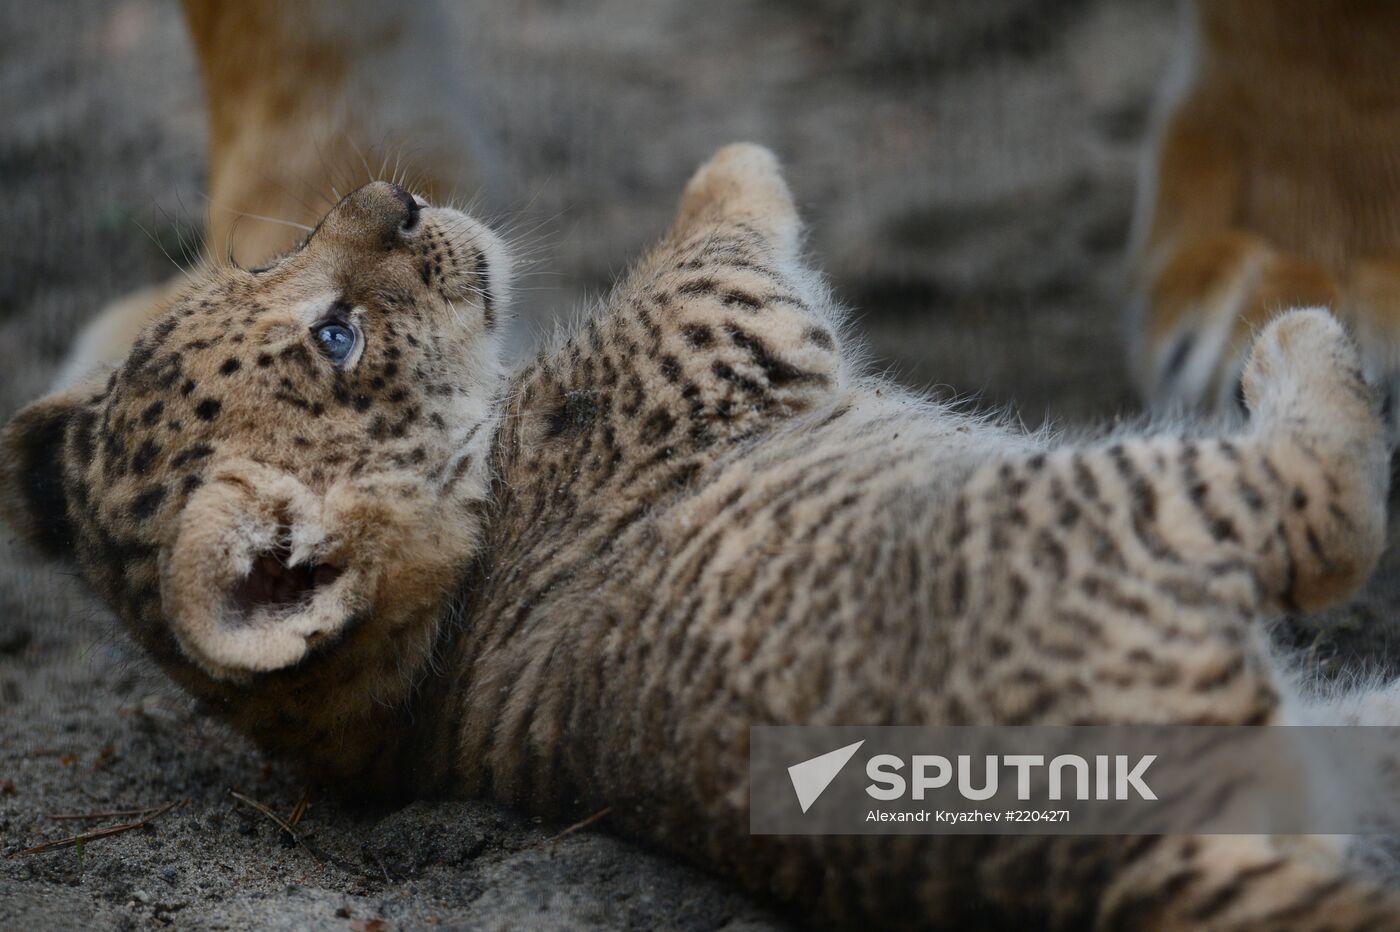 Ligress shows her cubs to visitors in Novosibirsk Zoo